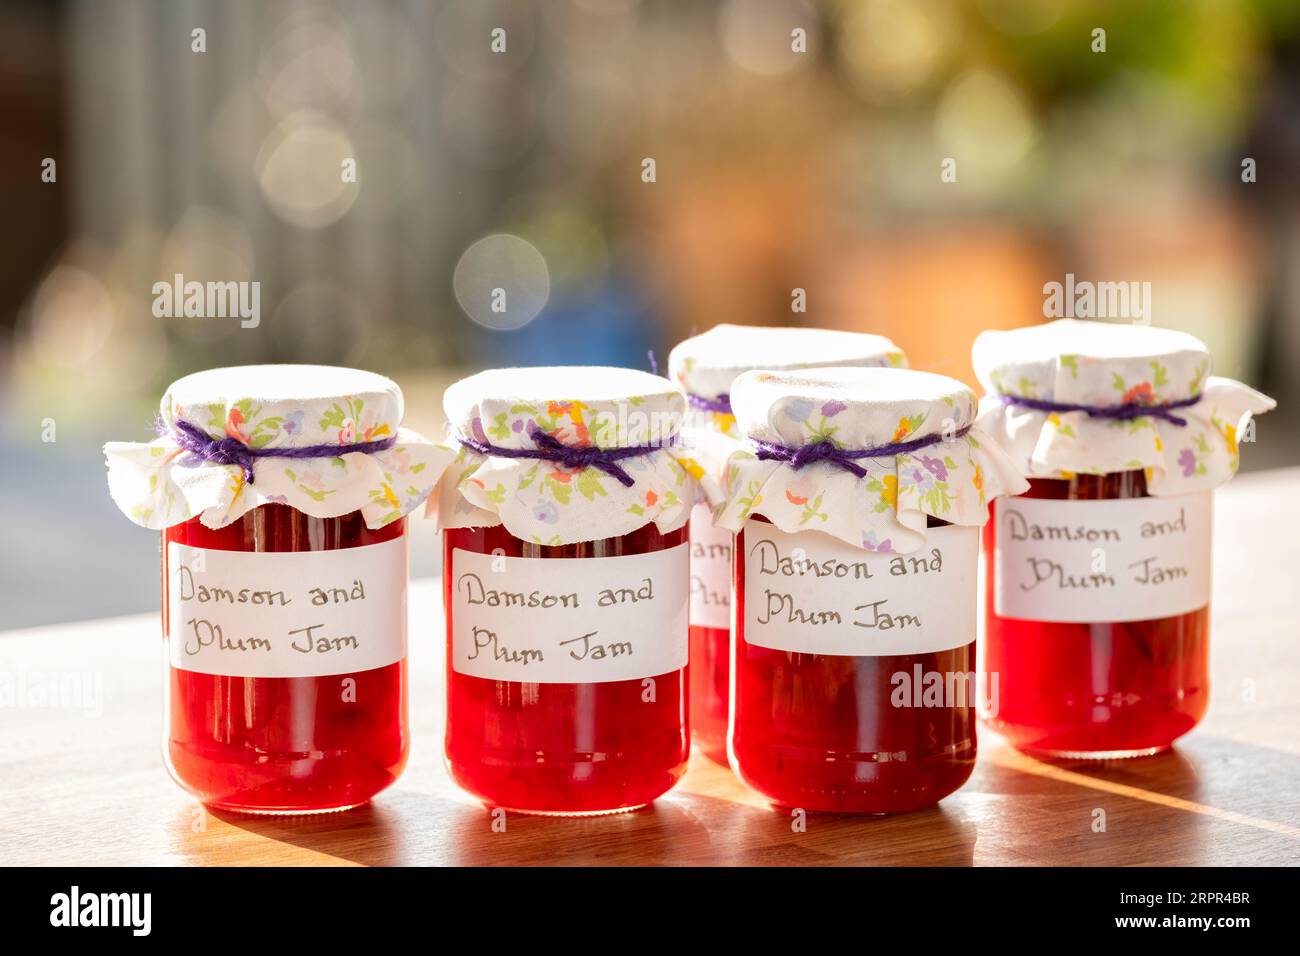 Jars of homemade Damson and plum jam. The glass jars have clear handwritten labels and each jar has a cloth topping. Stock Photo